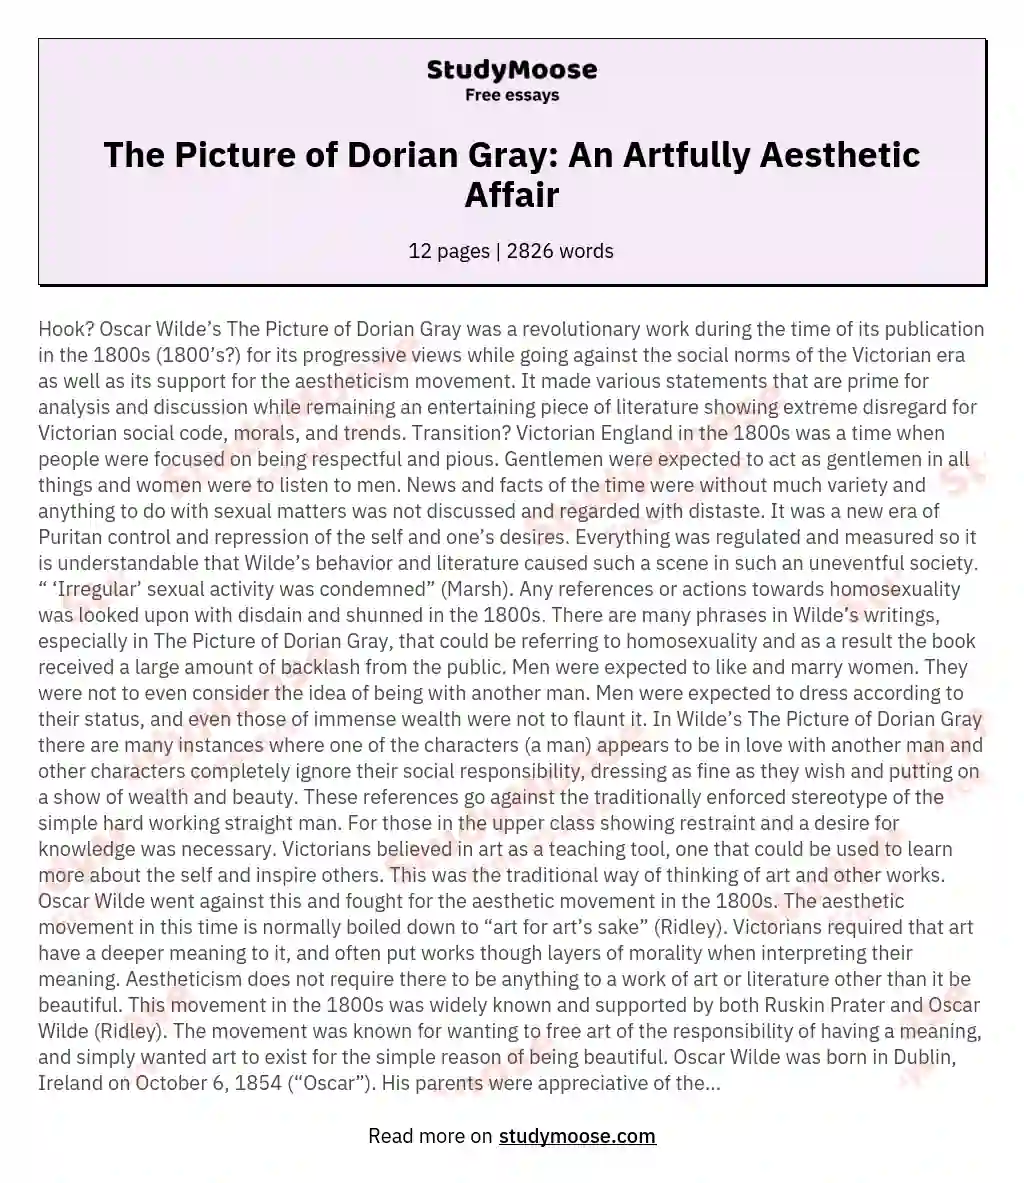 The Picture of Dorian Gray: An Artfully Aesthetic Affair